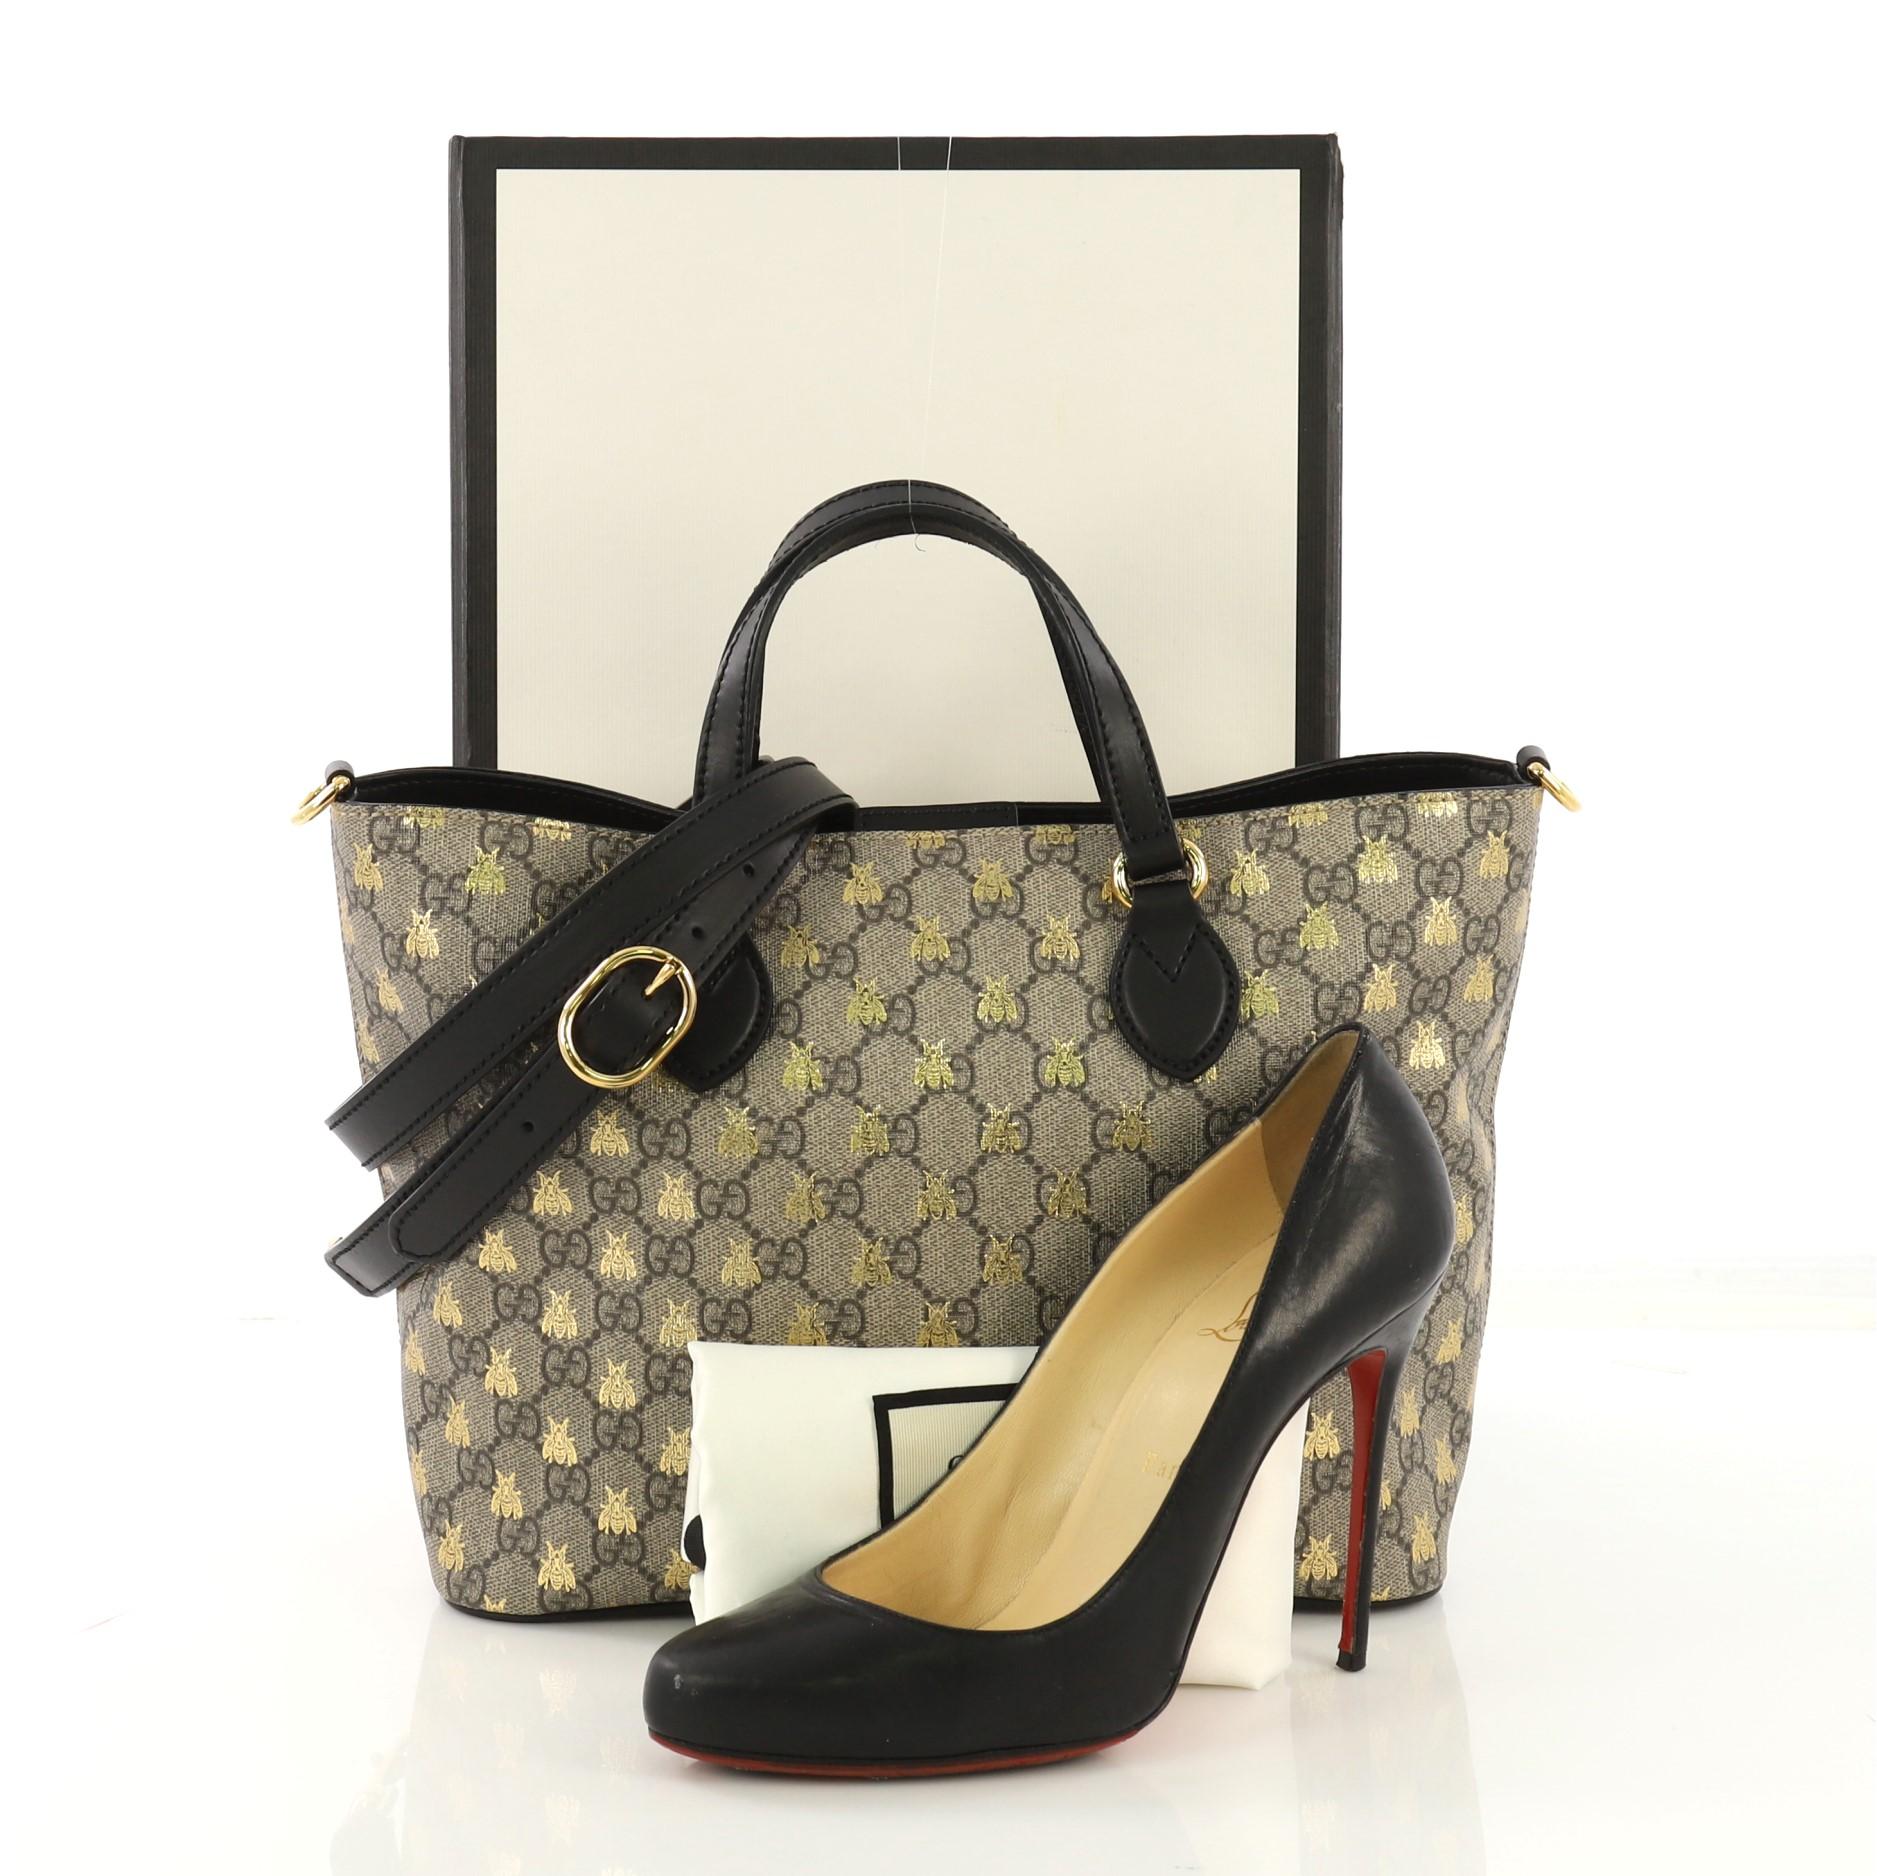 This Gucci Convertible Soft Tote Printed GG Coated Canvas Small, crafted from brown printed GG coated canvas and black leather, features dual flat handles, golden bee printed throughout and gold-tone hardware. Its hidden magnetic snap closure opens